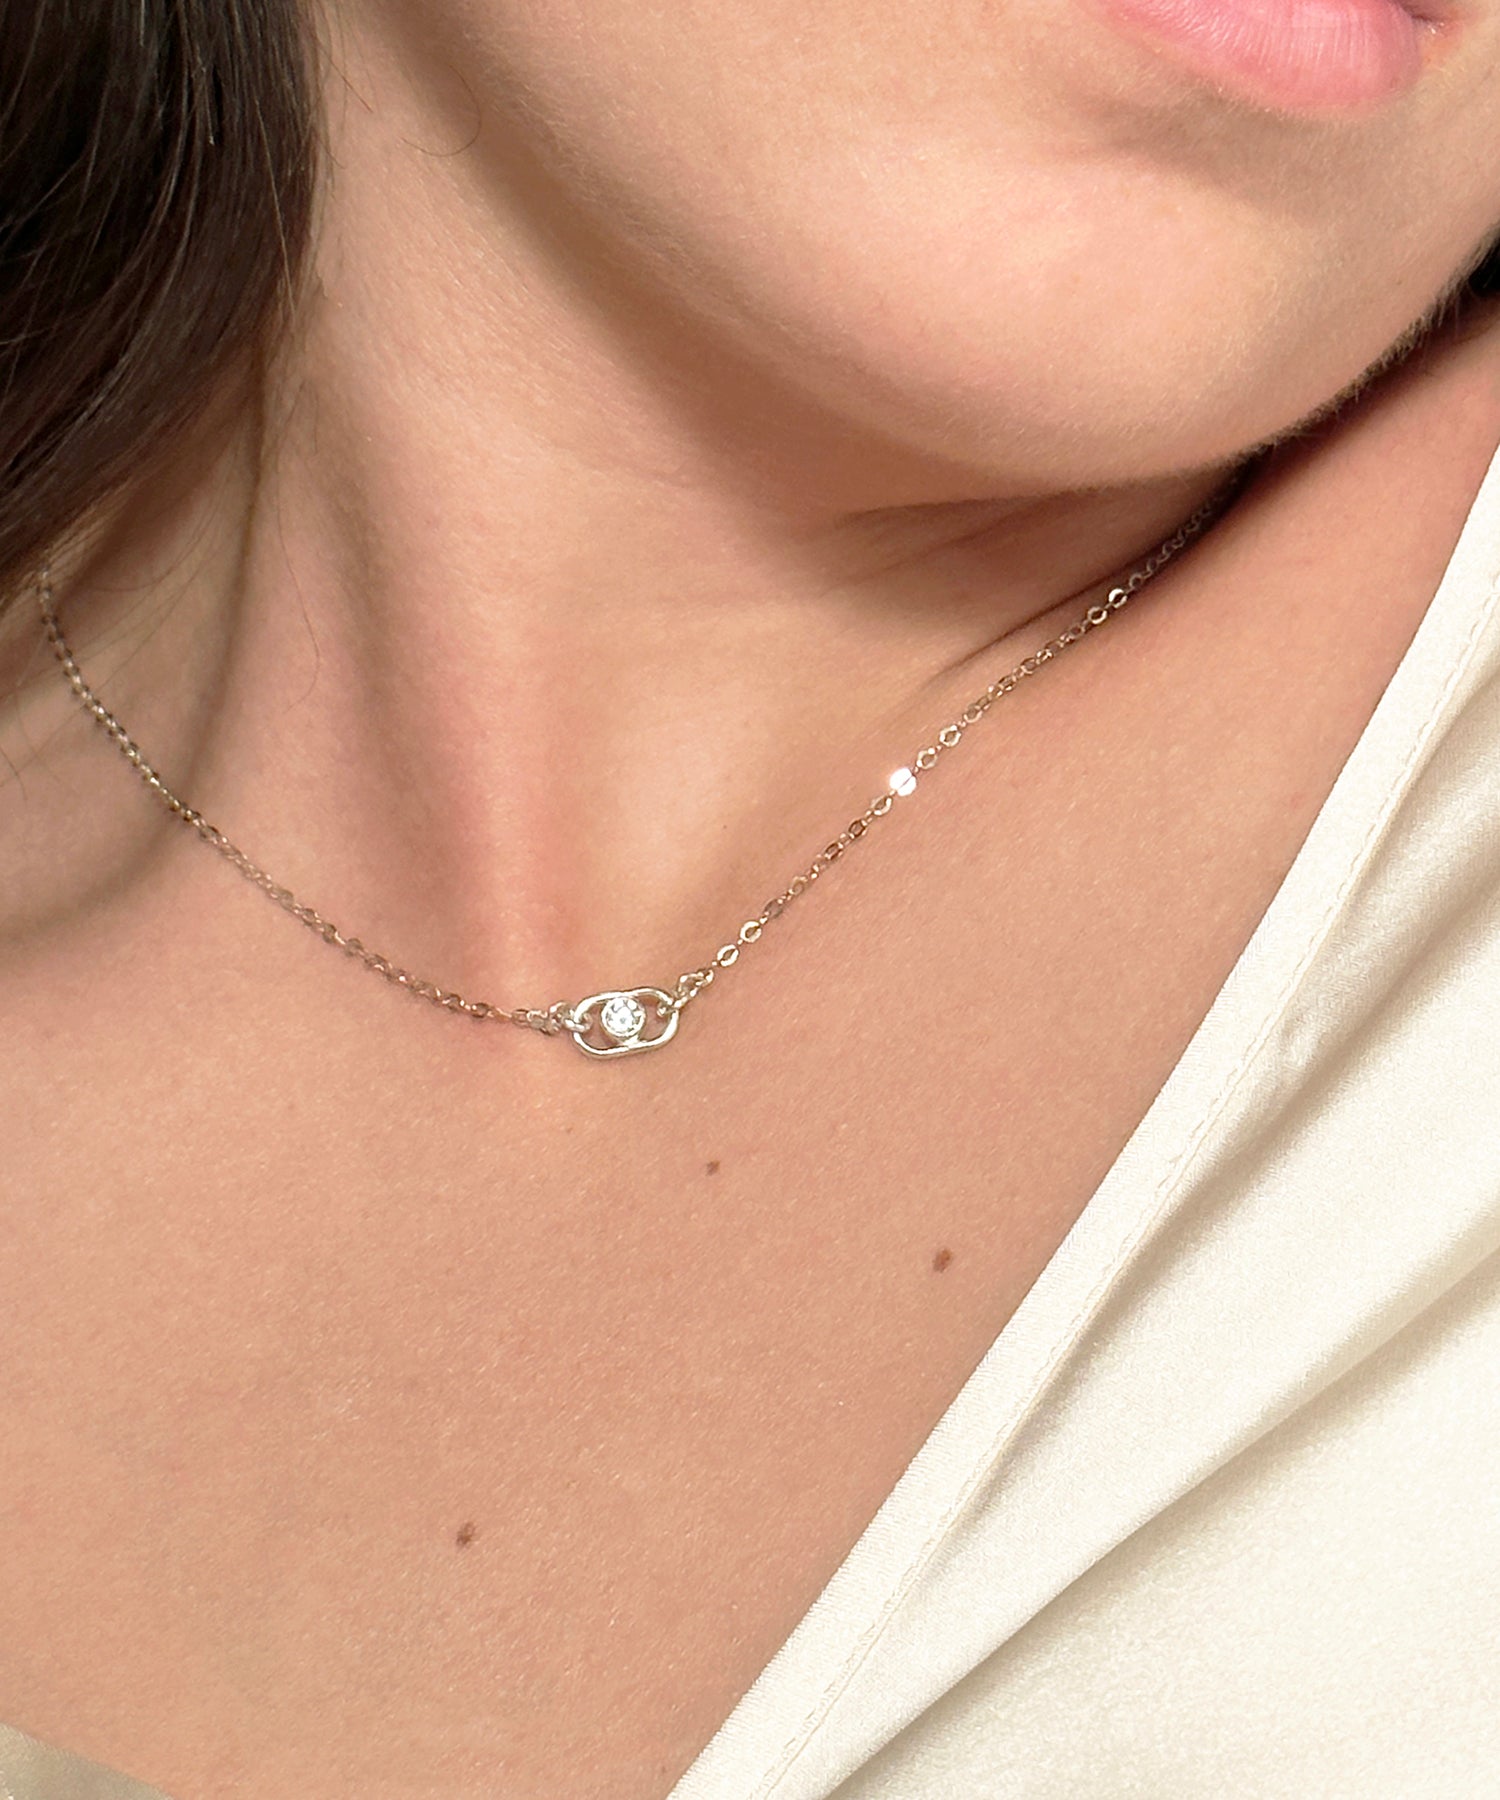 women wearing a diamond charm necklace with a cable chain in sterling silver